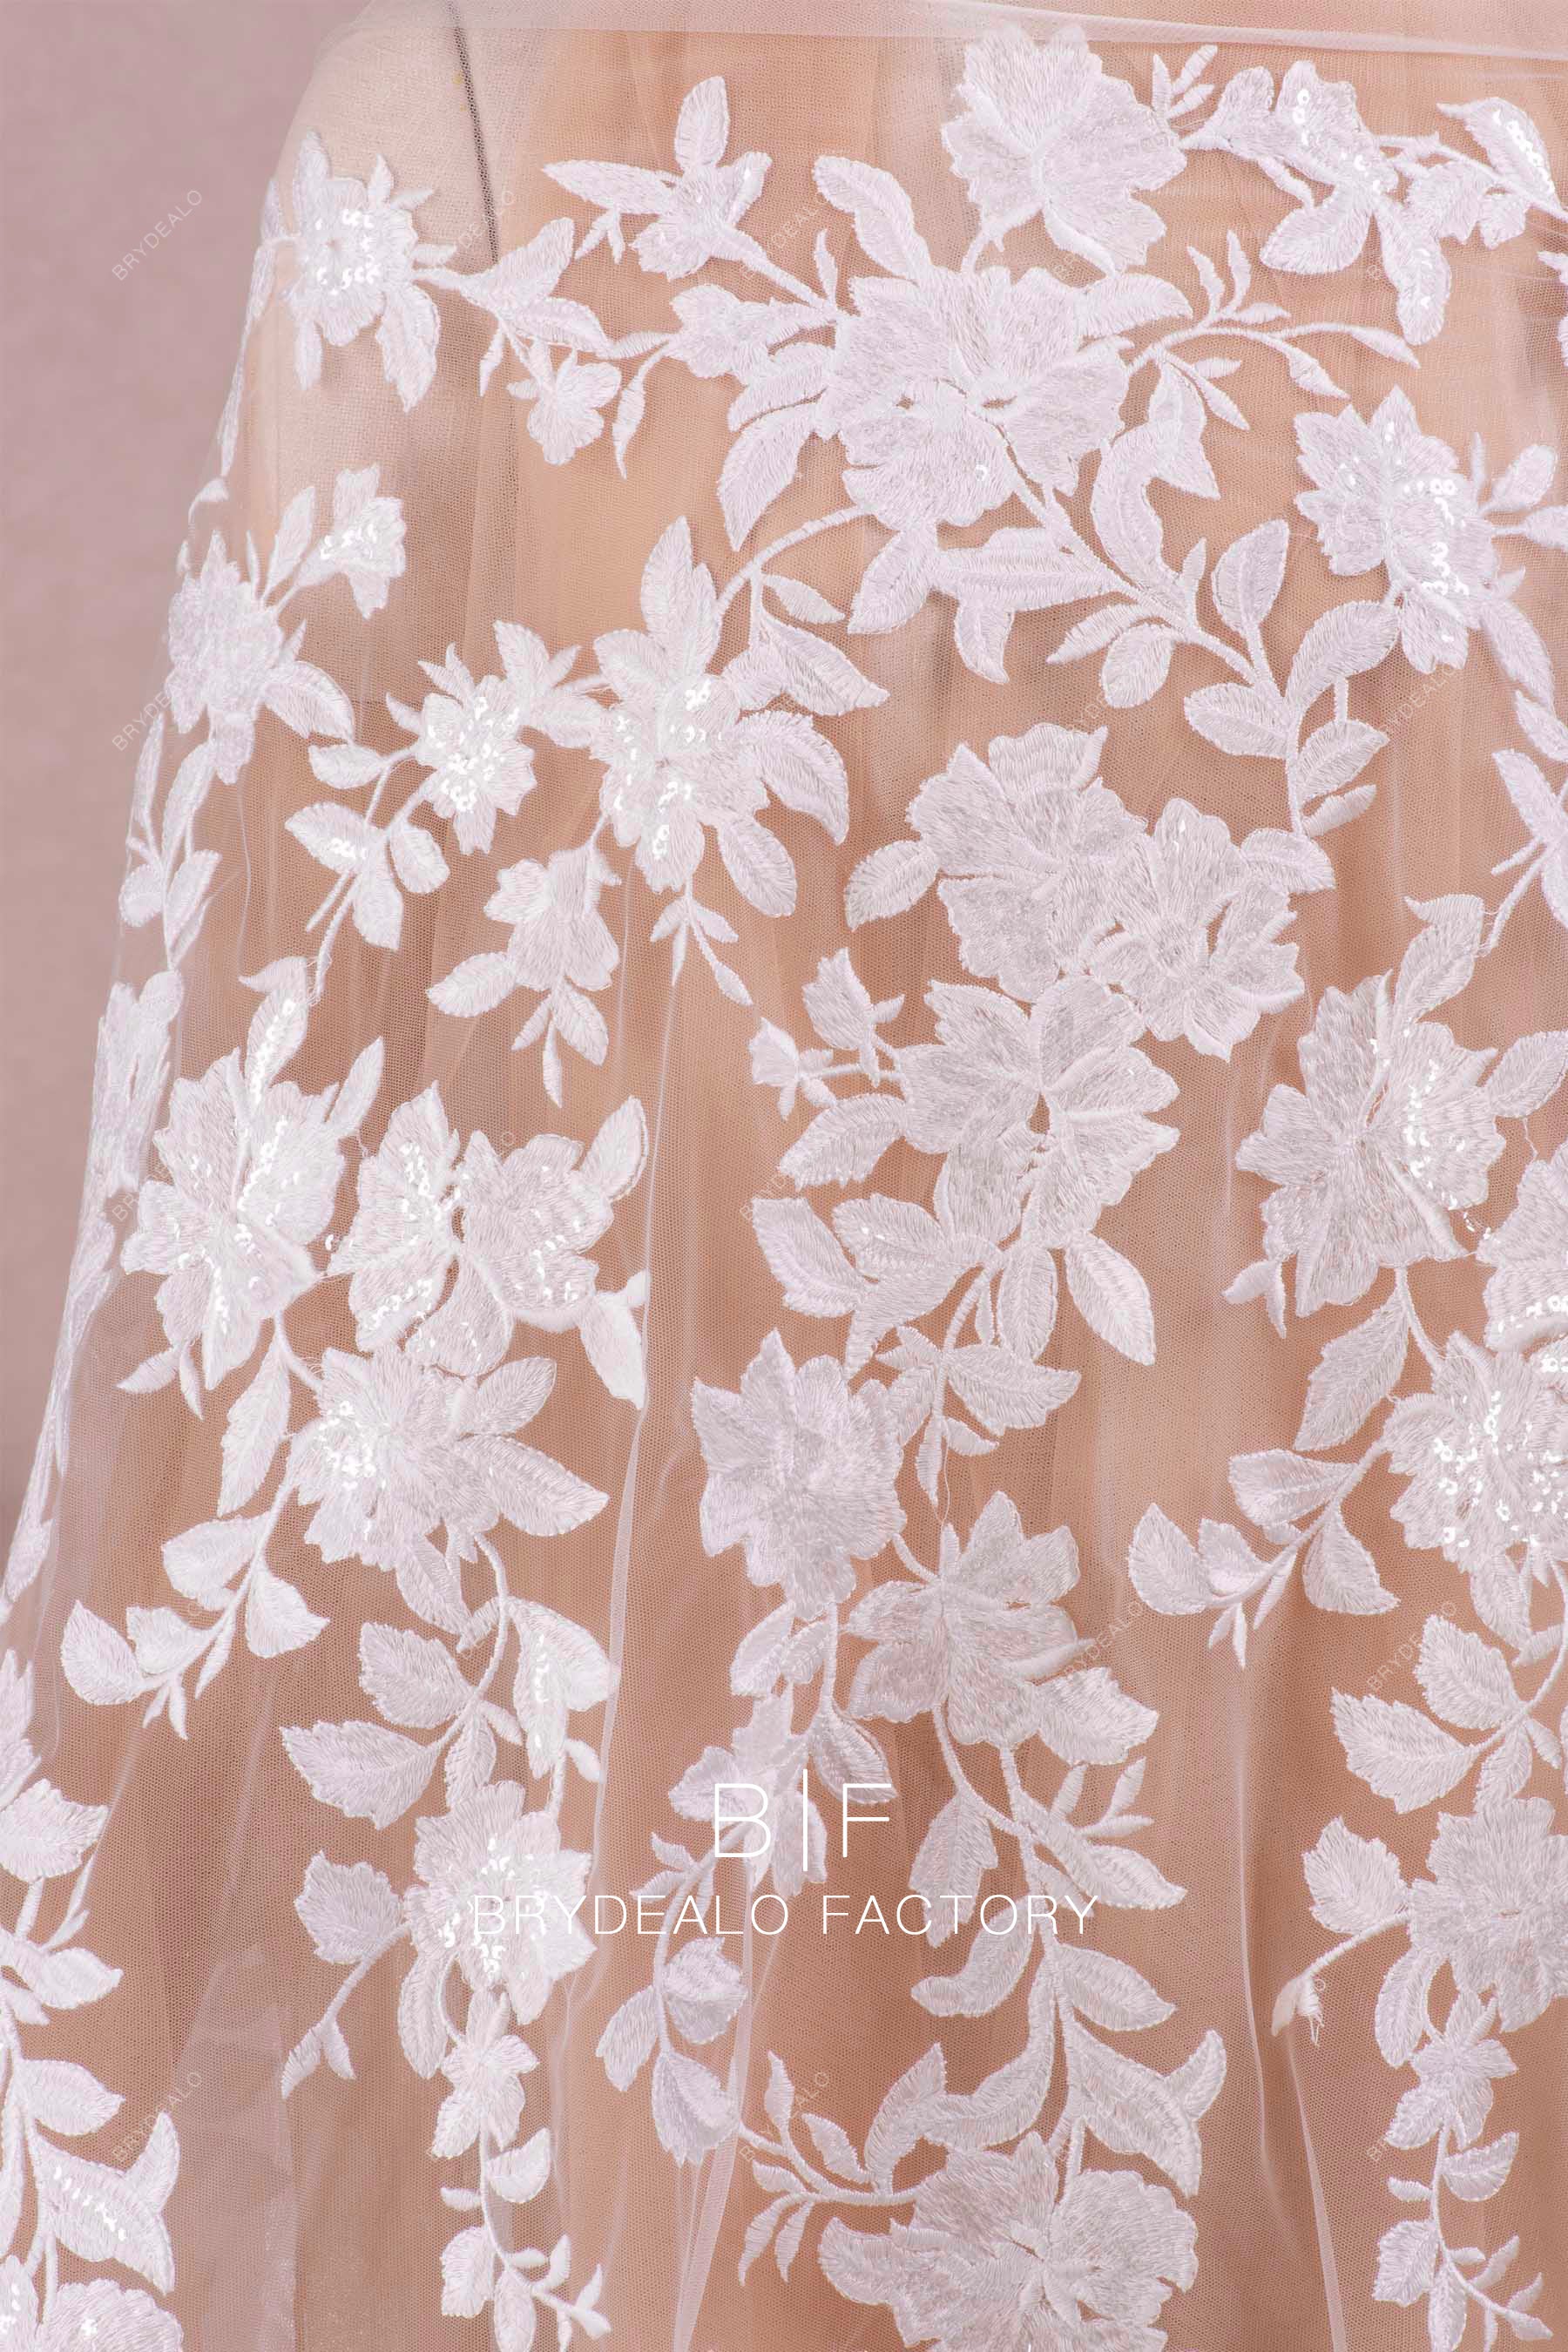 clear sequin flower lace fabric